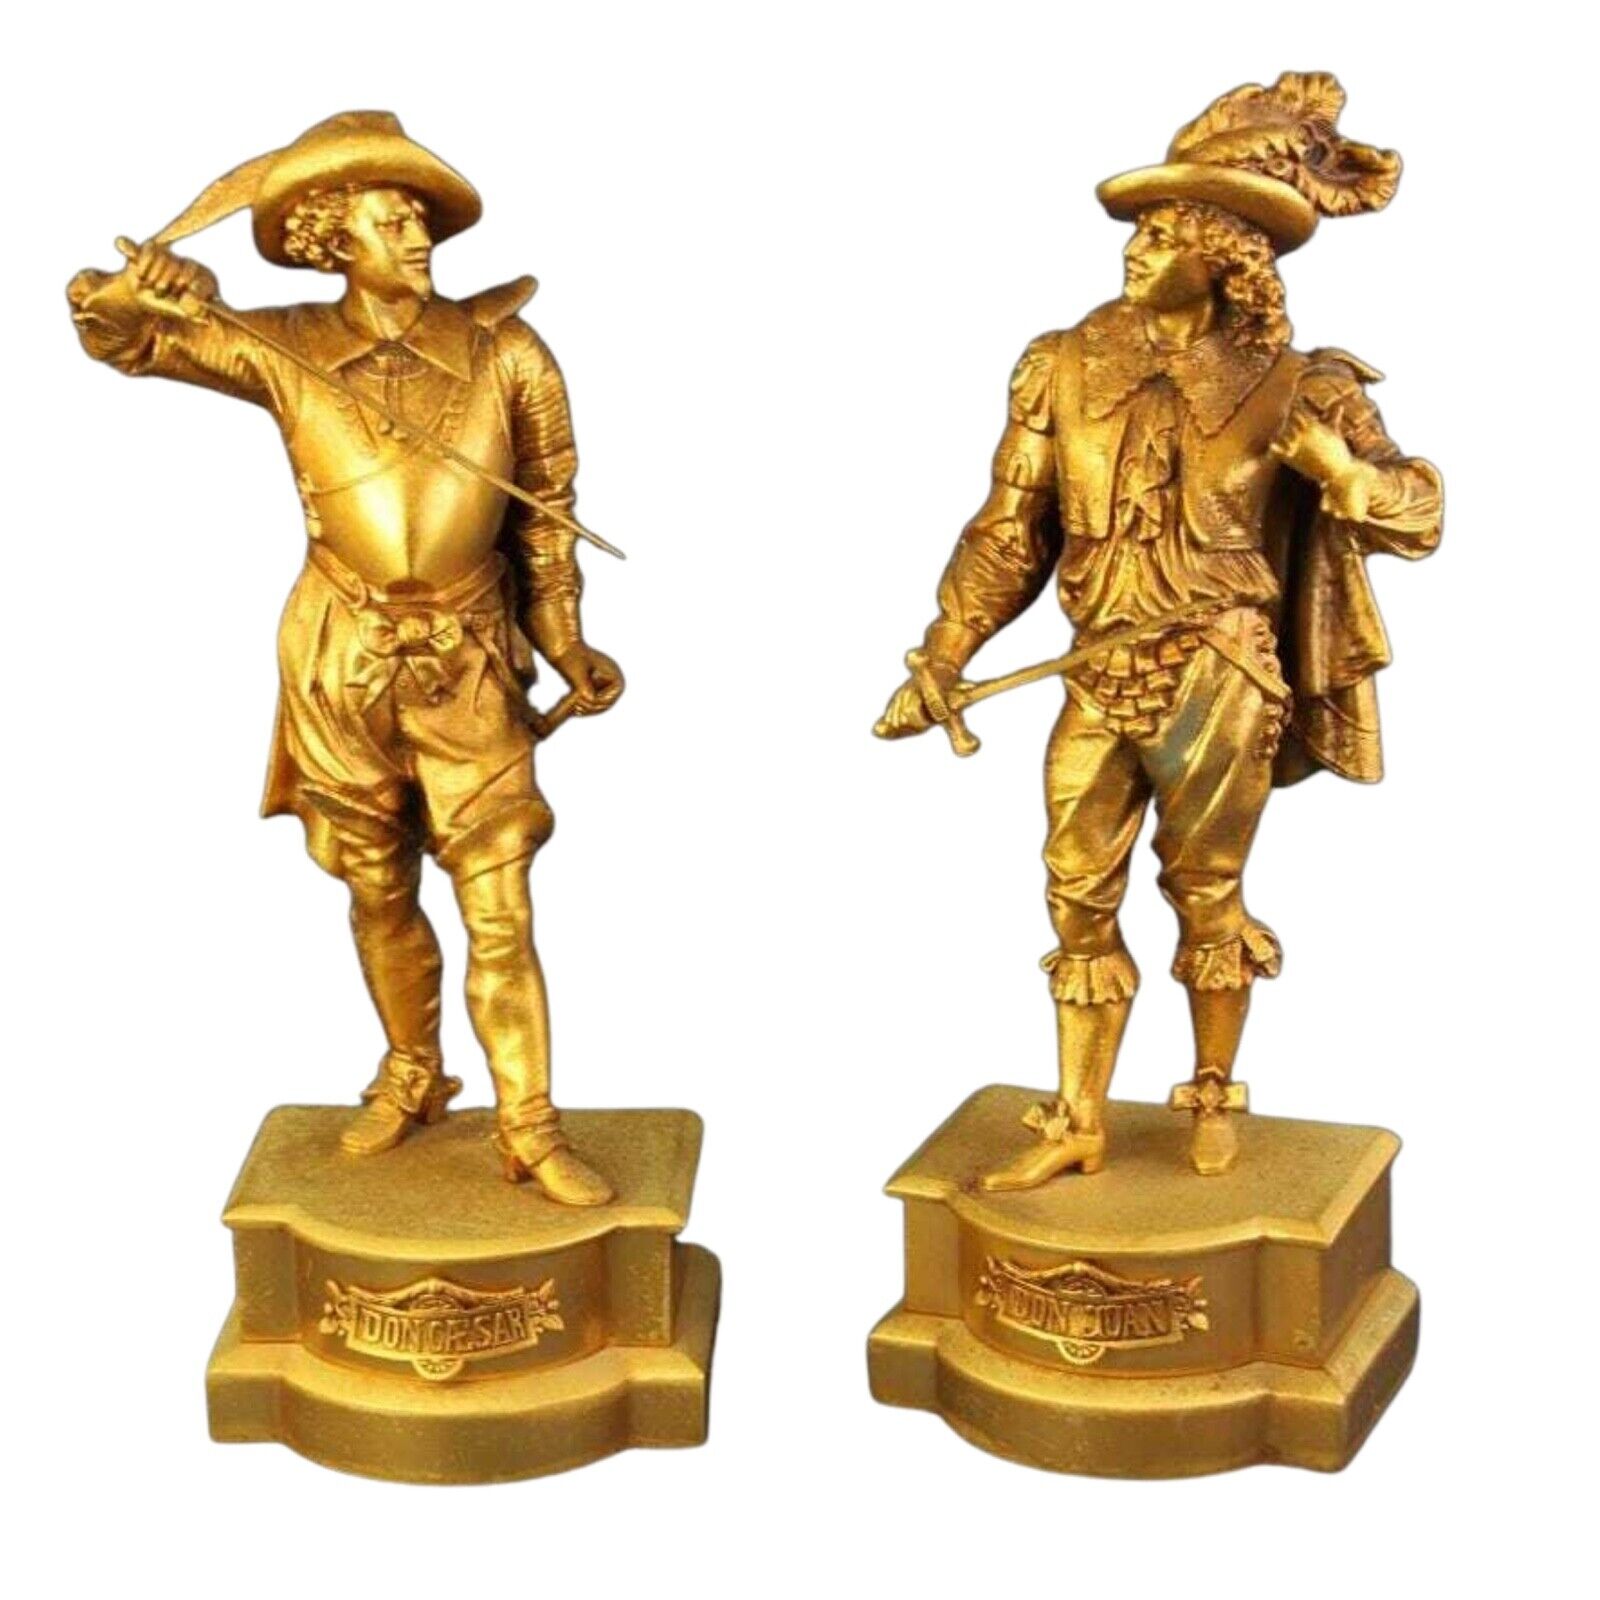 Statues, Pair of Gold Painted Metal, Vintage, Don Juan, Don Cesar, 21 x 8, 1900s